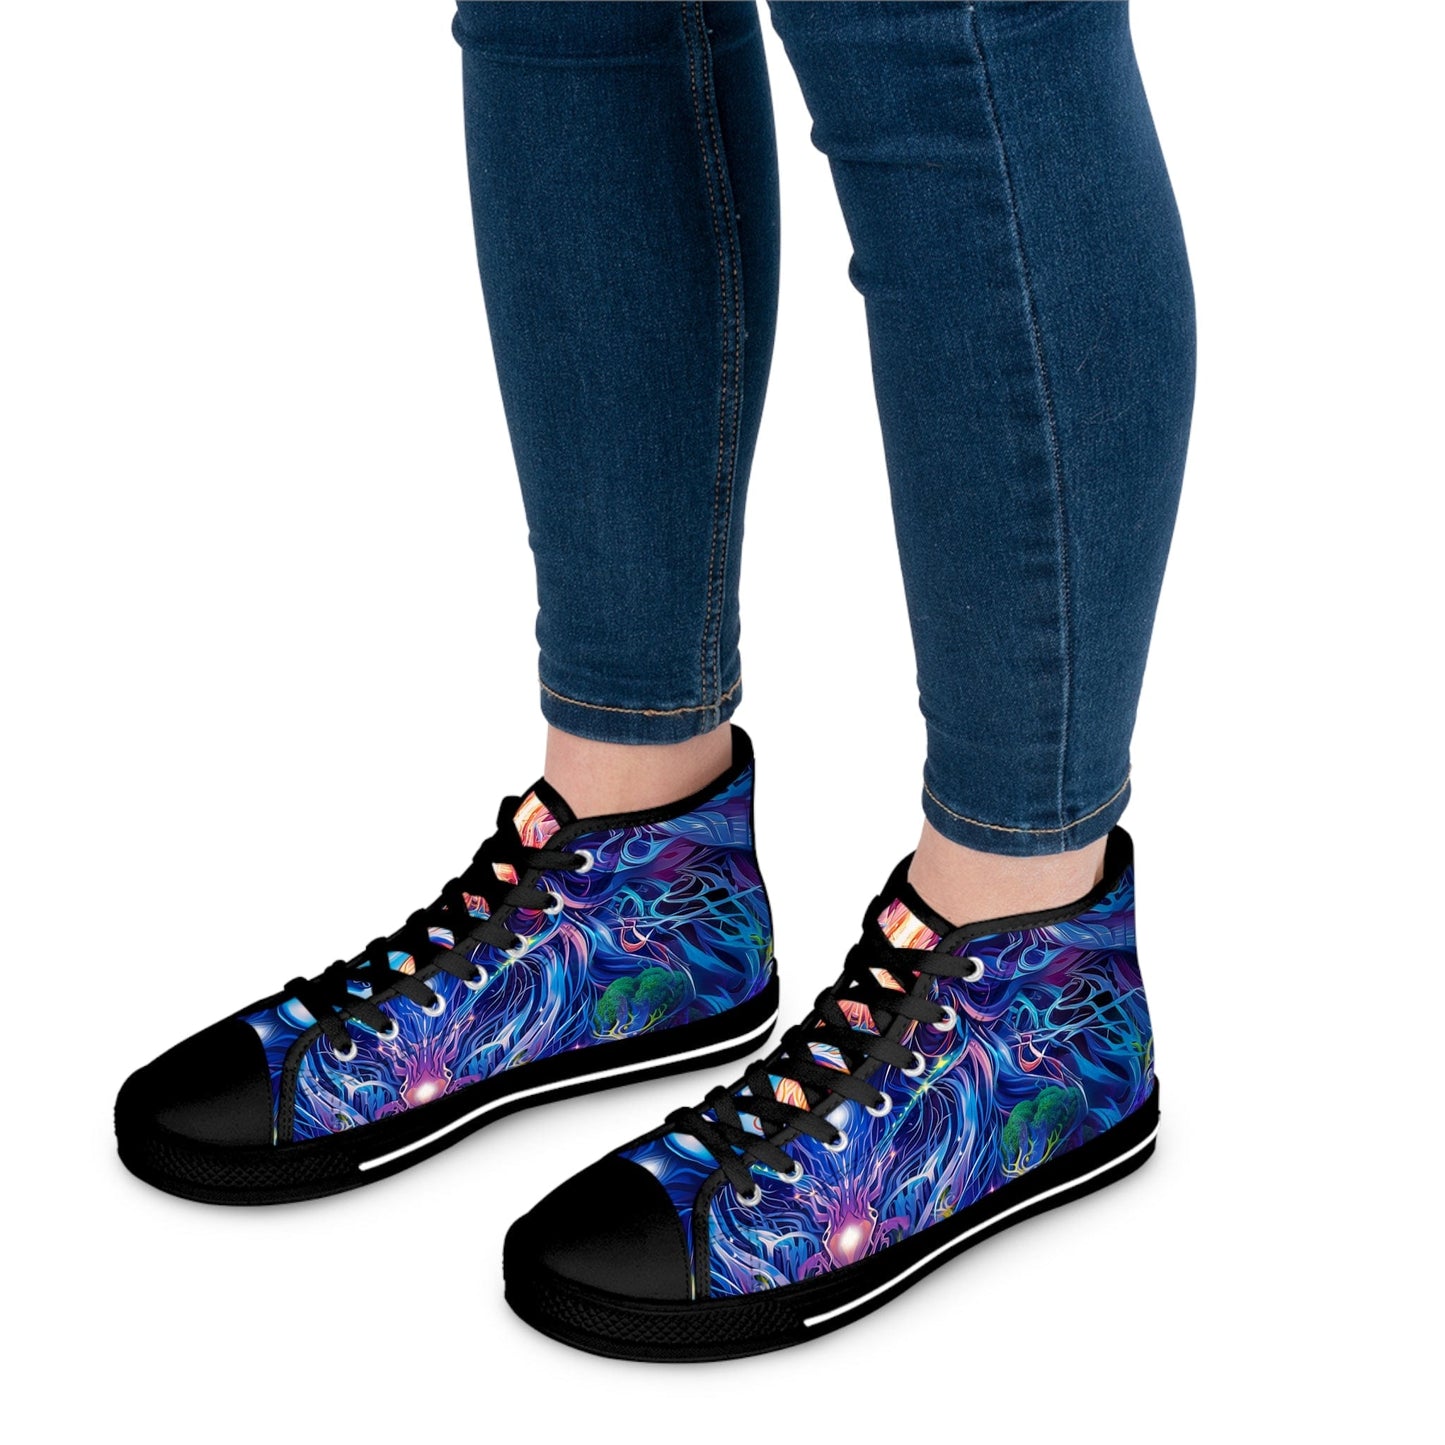 "The Sacred Vine" WOMEN'S HIGHT TOP SNEAKERS